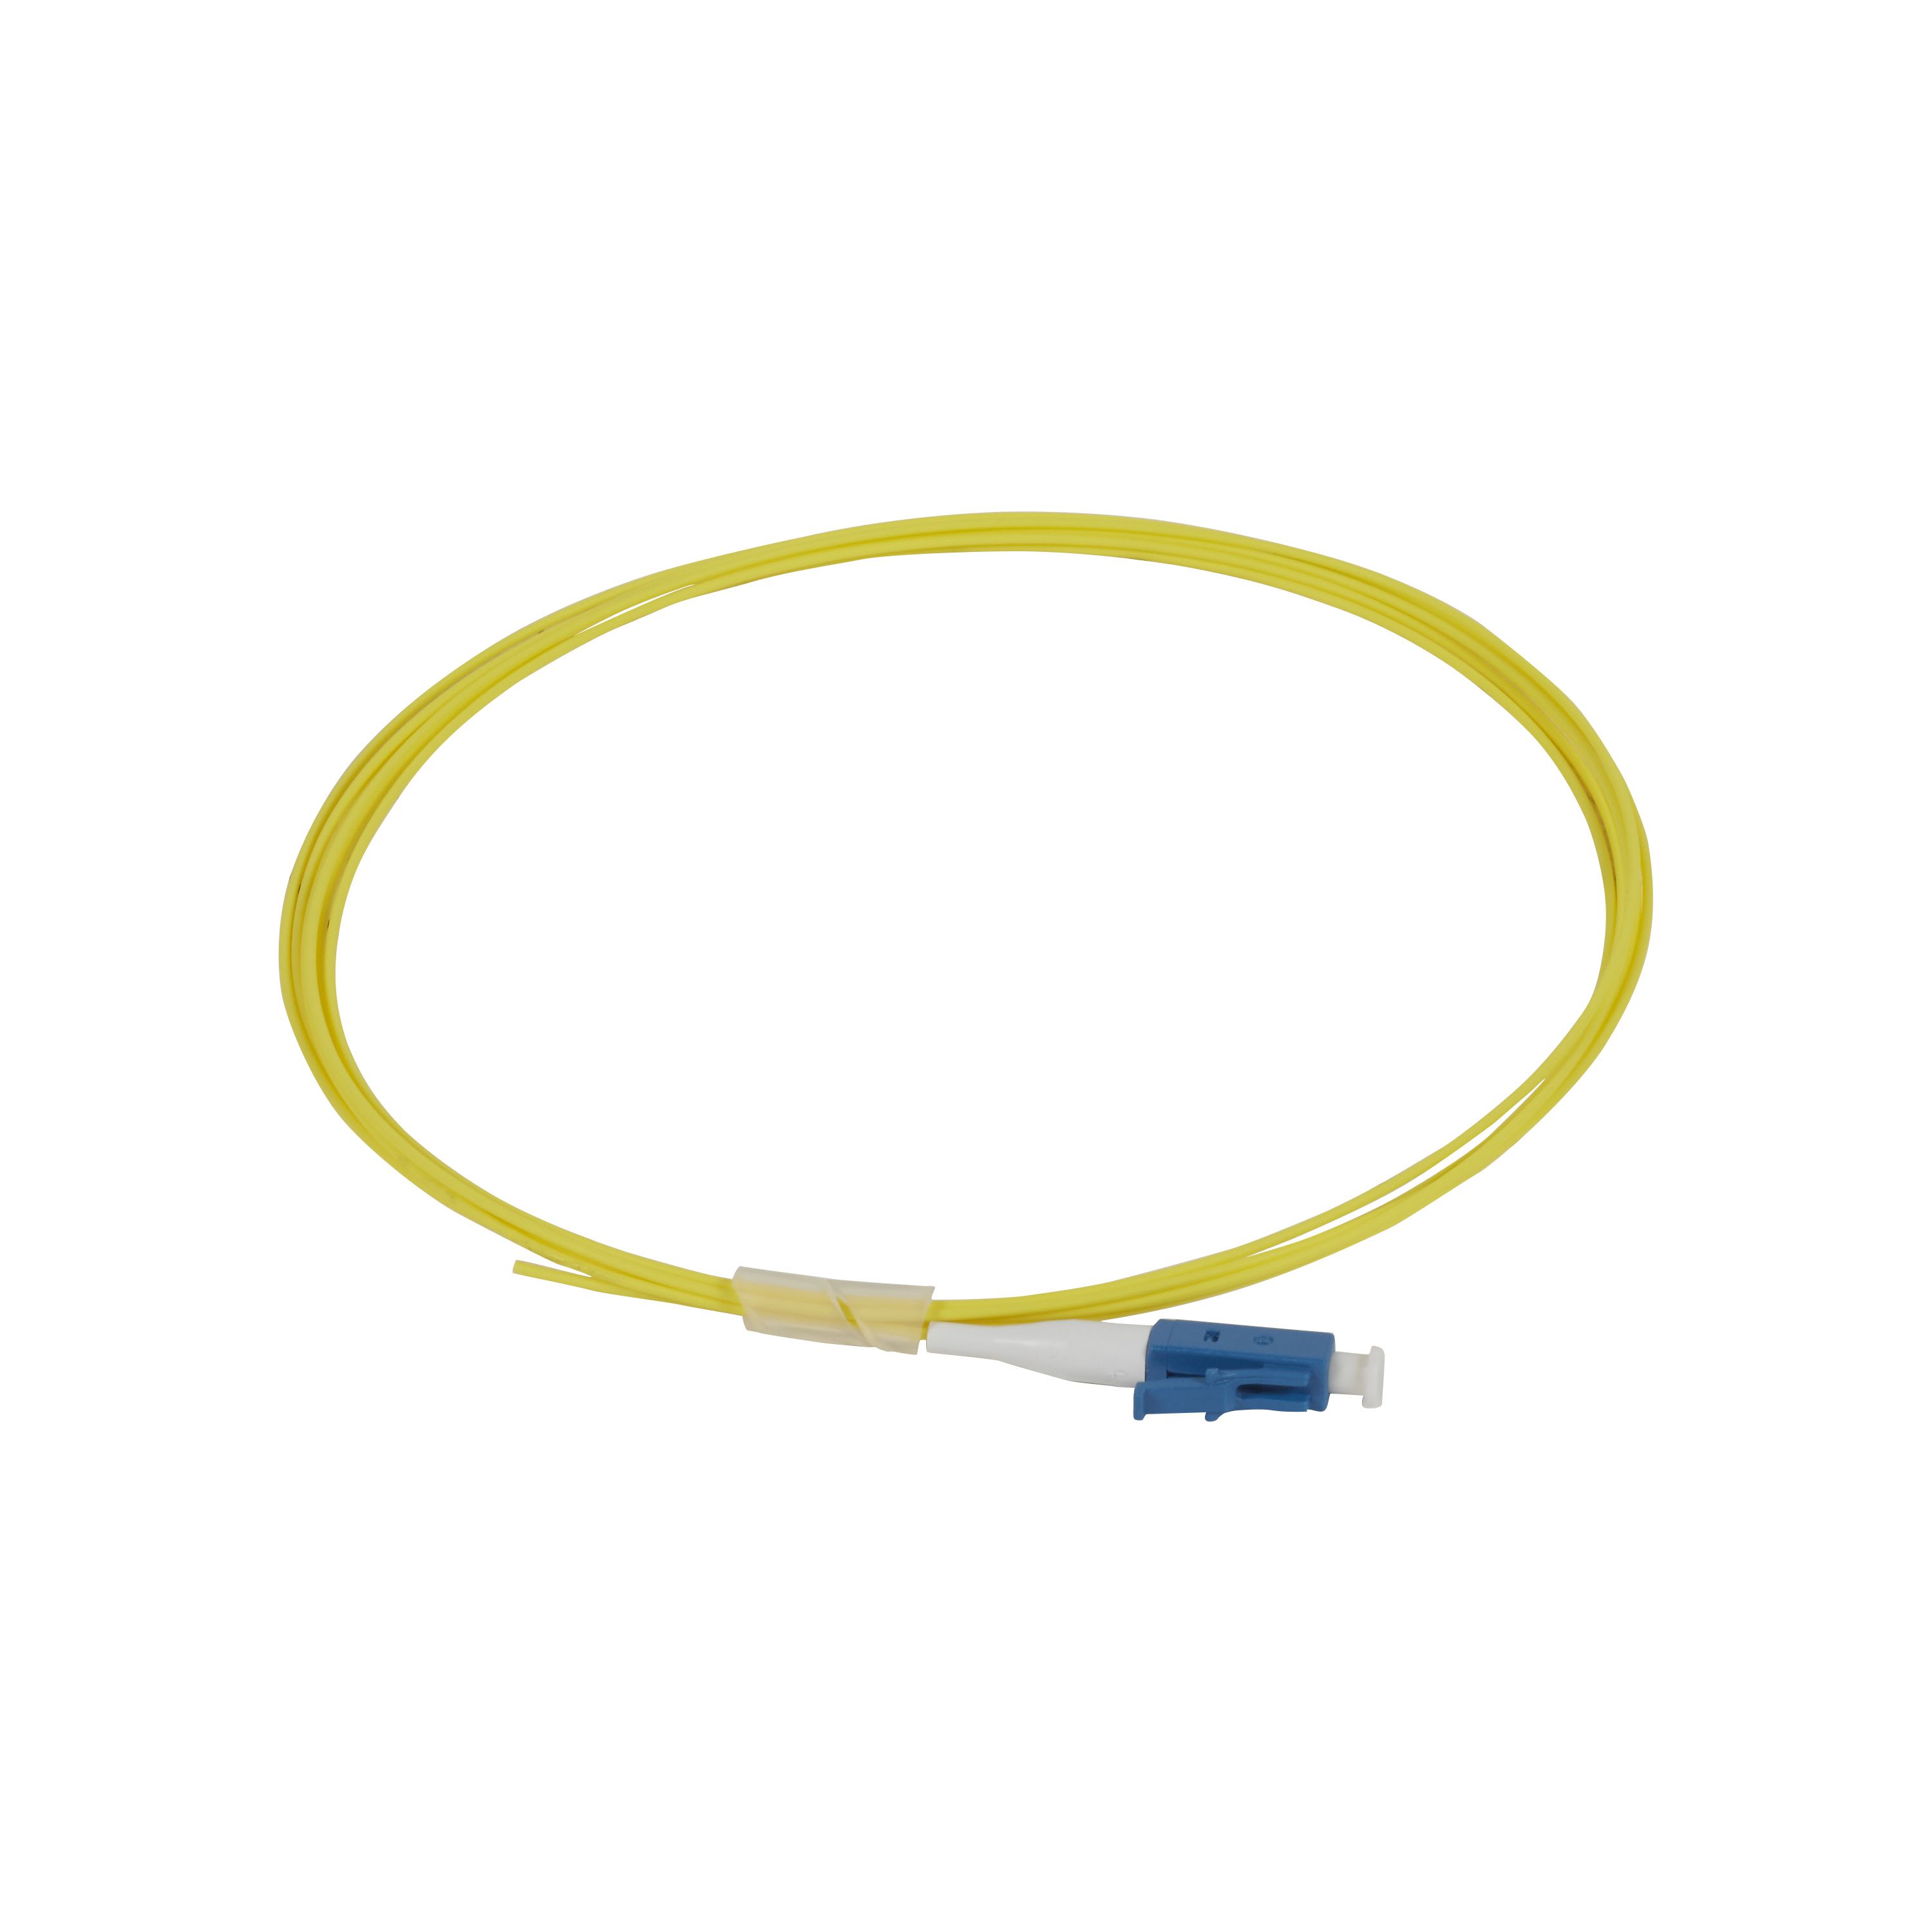 LEGRAND - LCS³ pigtail voor singlemode OS1/OS2 LC-UPC connectoren LSZH 1 meter